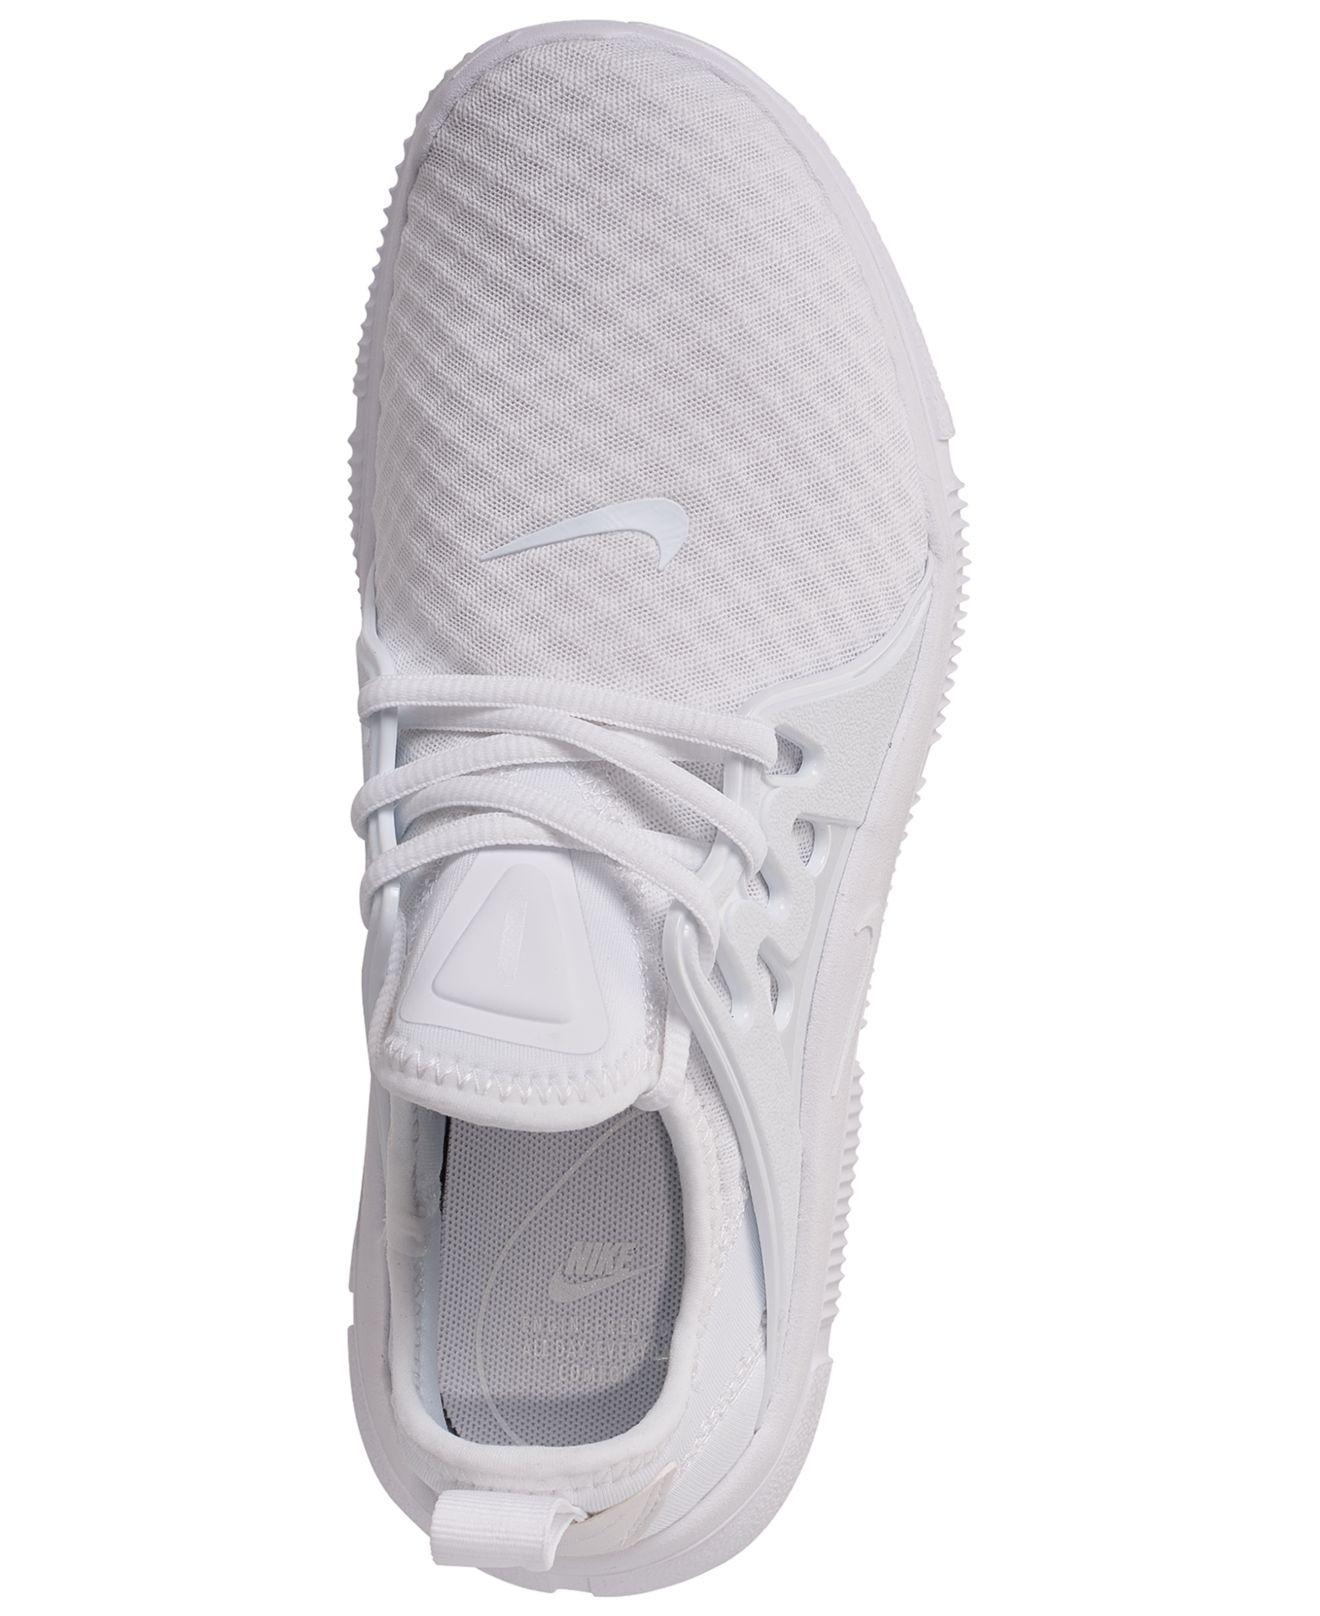 women's acalme running sneakers from finish line